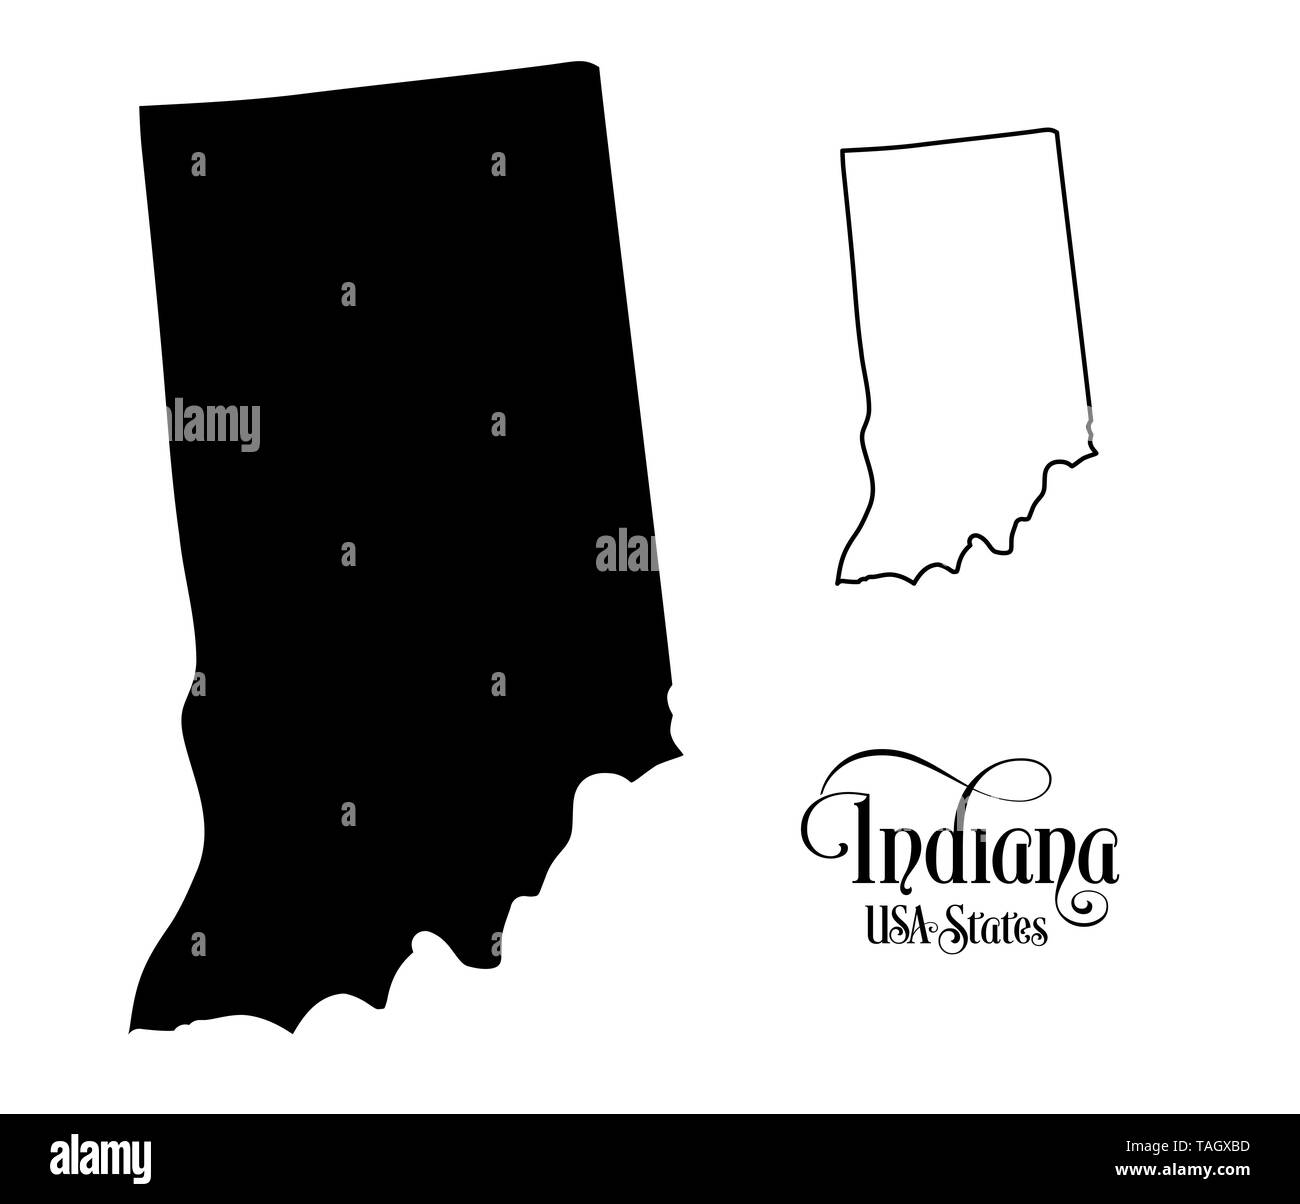 Map of The United States of America (USA) State of Indiana - Illustration on White Background. Stock Photo